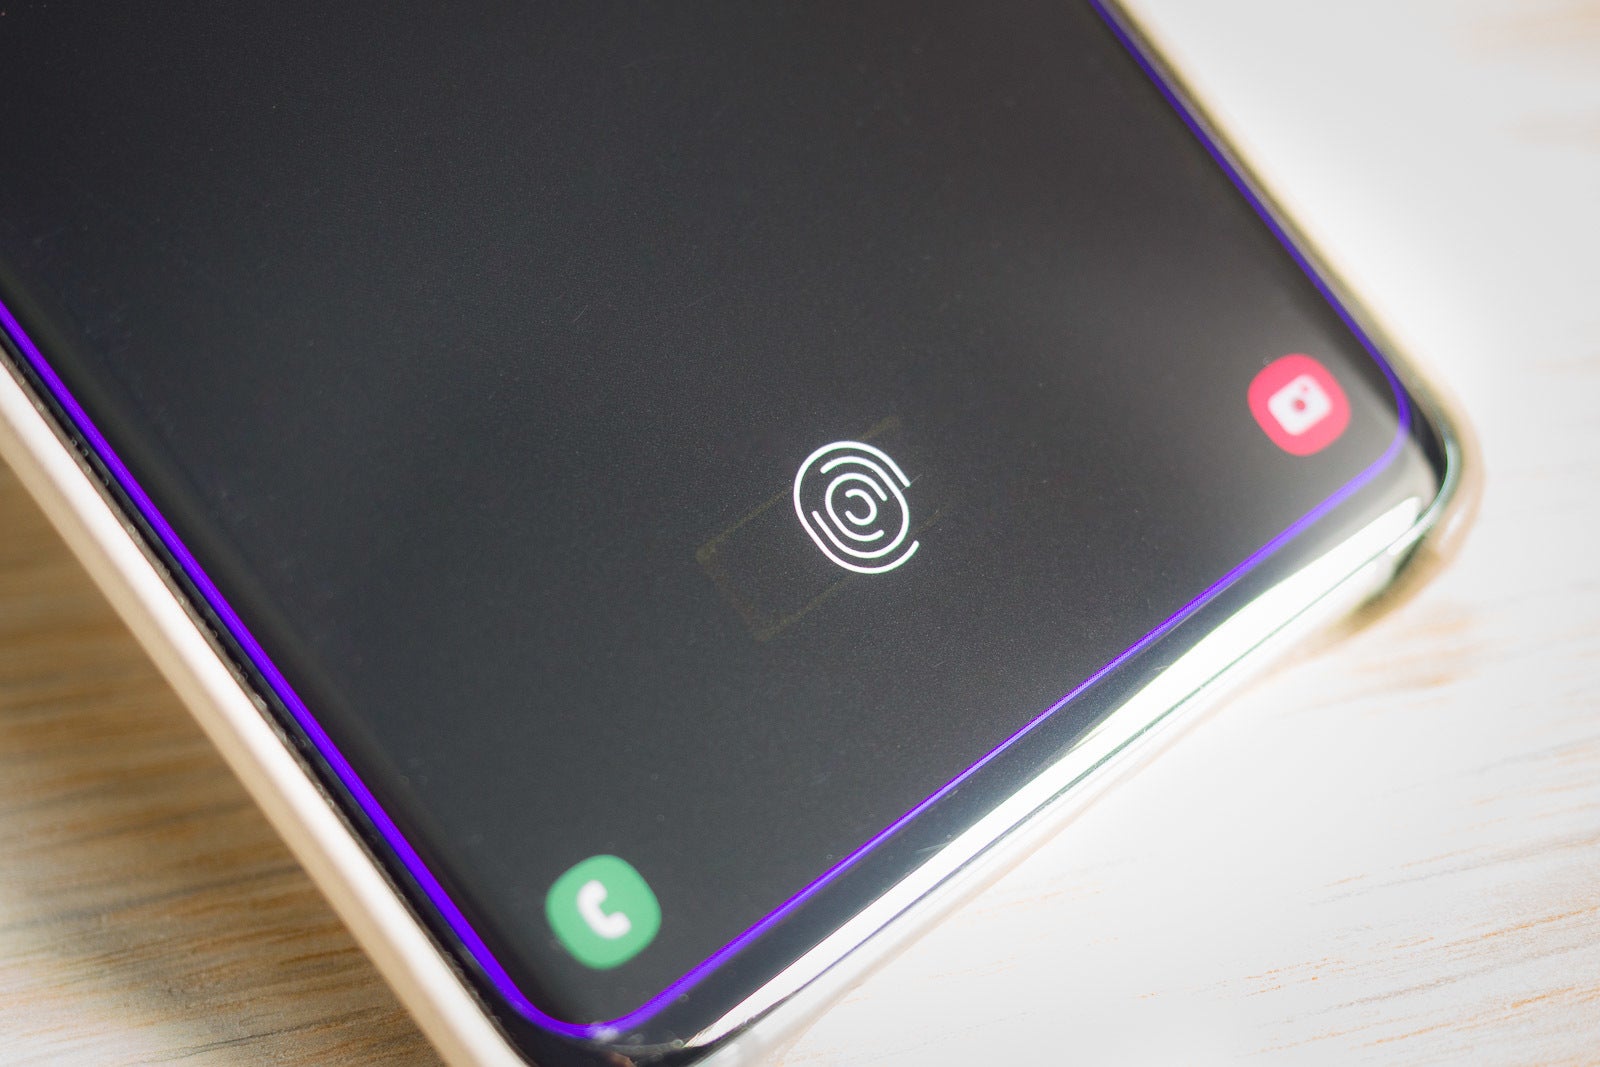 Got a Galaxy S10? You'll find out that... no LED notification, but tap to wake and more